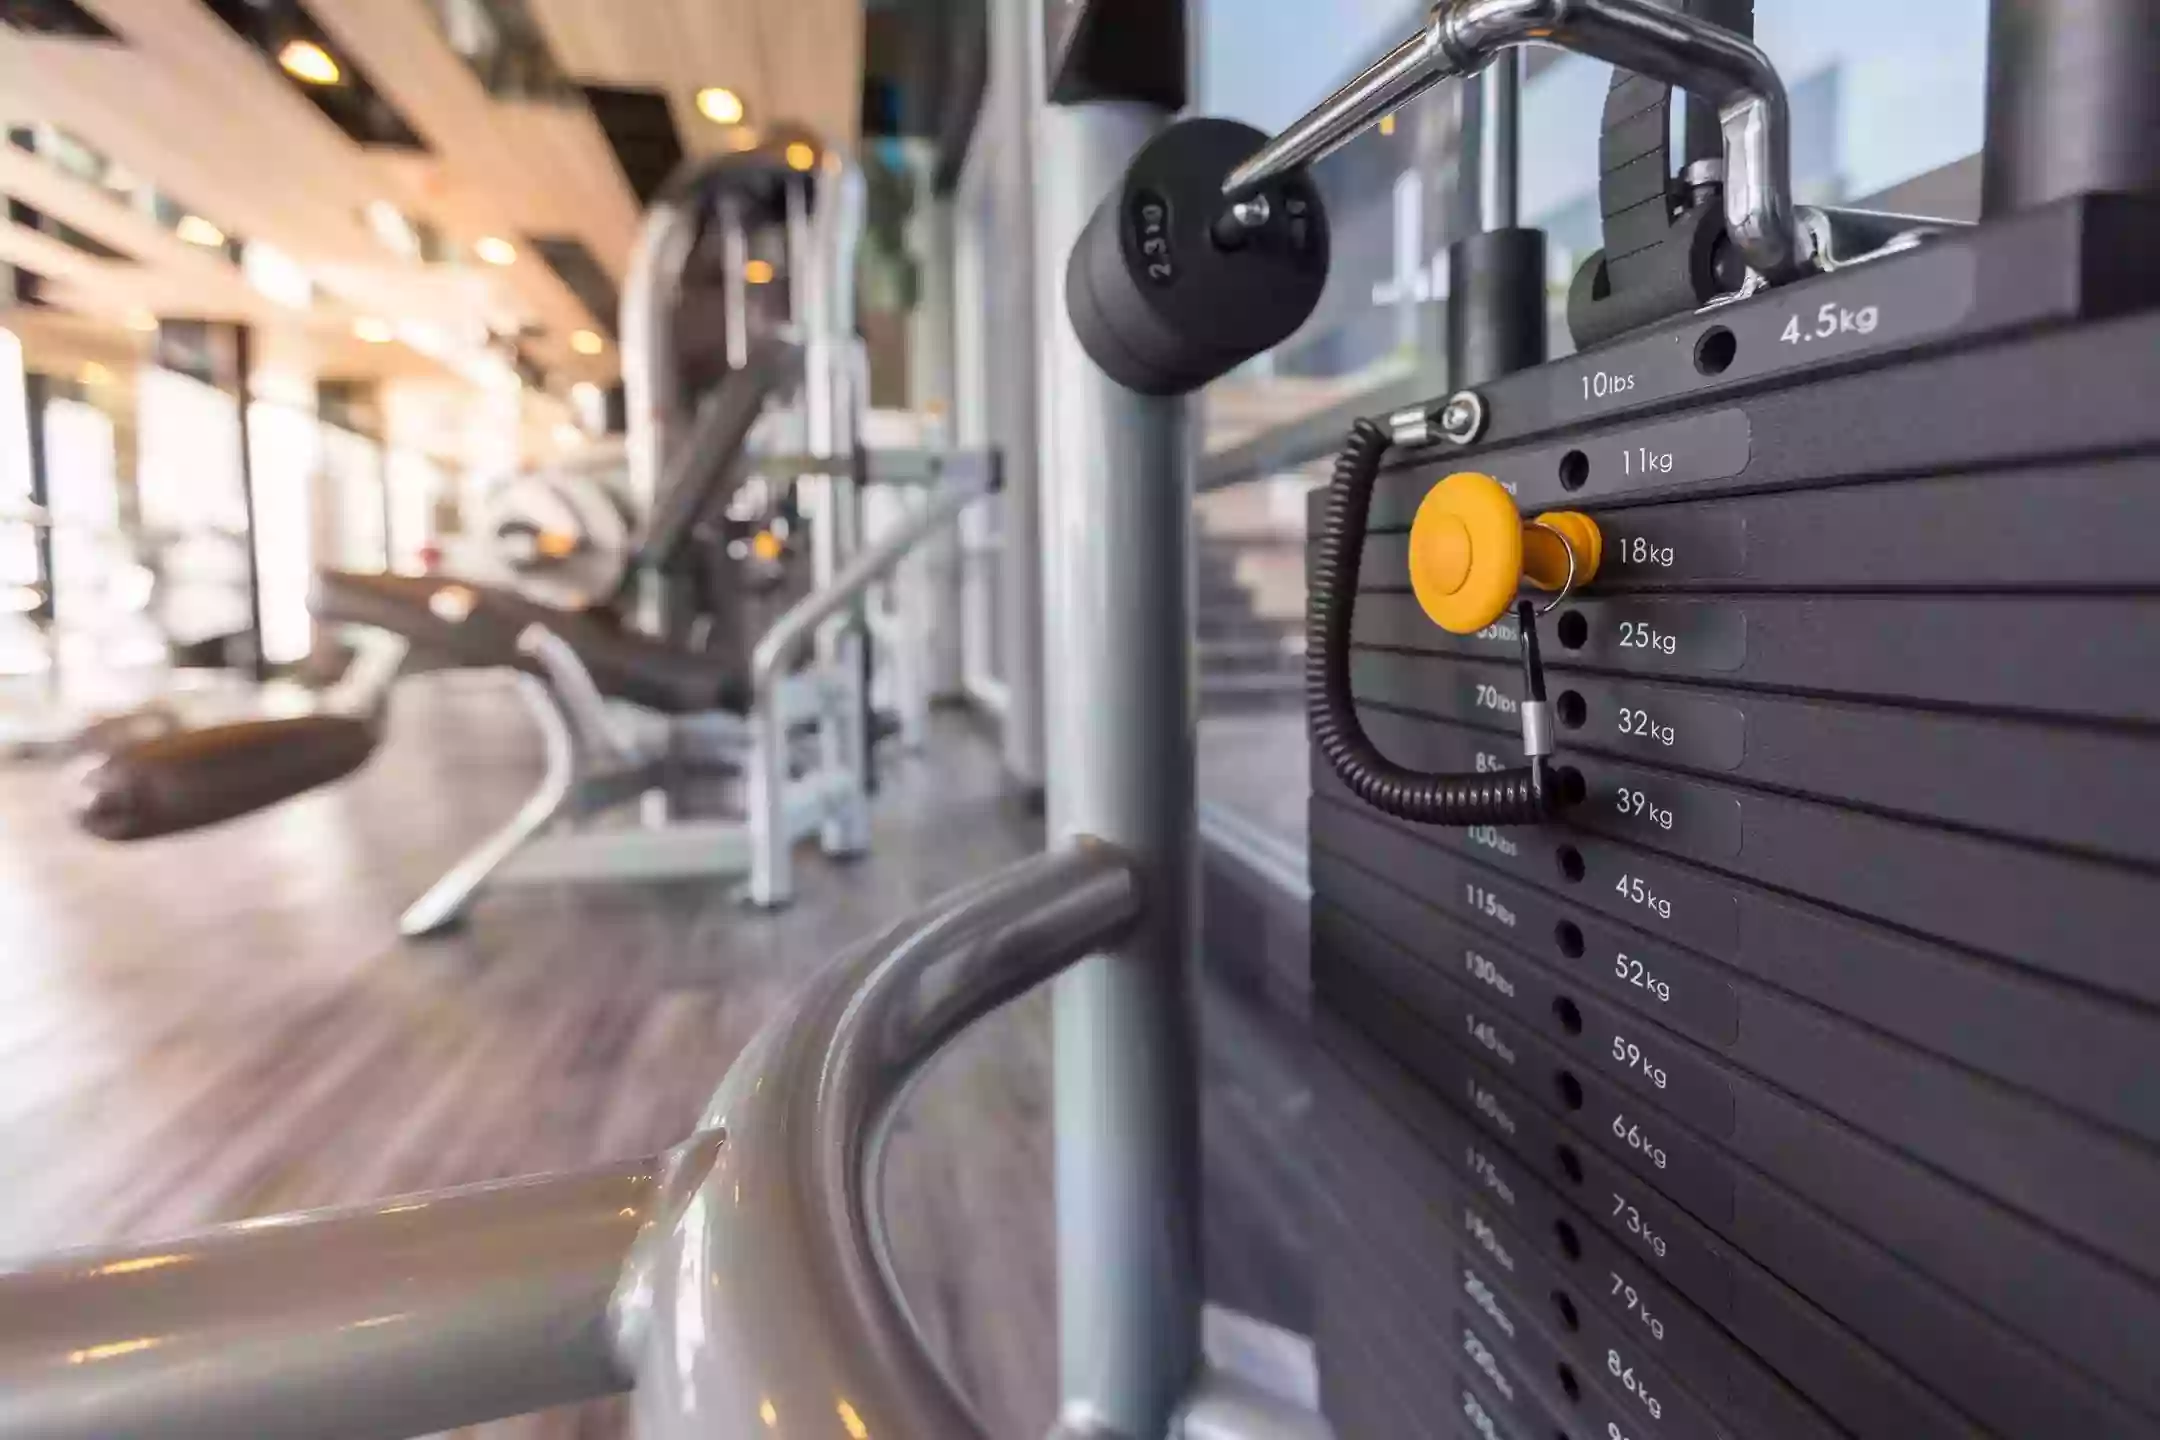 Foothill Fitness Equipment Sales and Repair